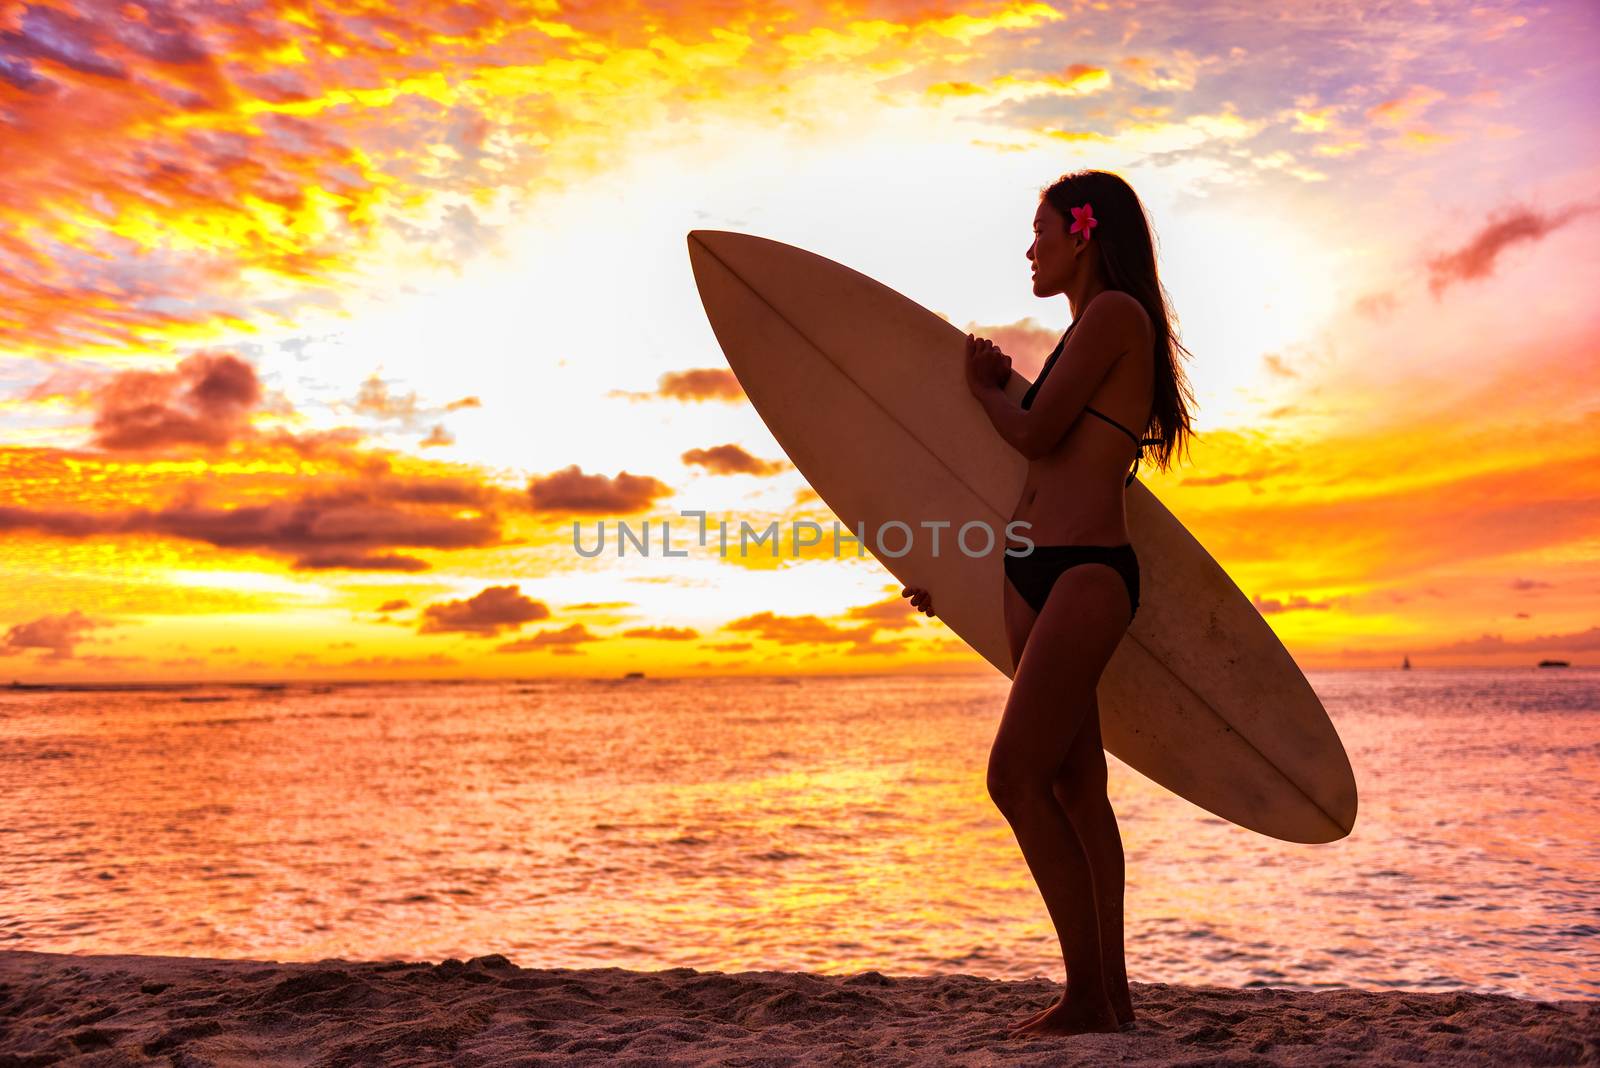 Surfer bikini girl on Hawaii beach holding surf board watching ocean waves at sunset. Silhouette of Asian sport woman over landscape, sky and clouds background. Summer vacation lifestyle.